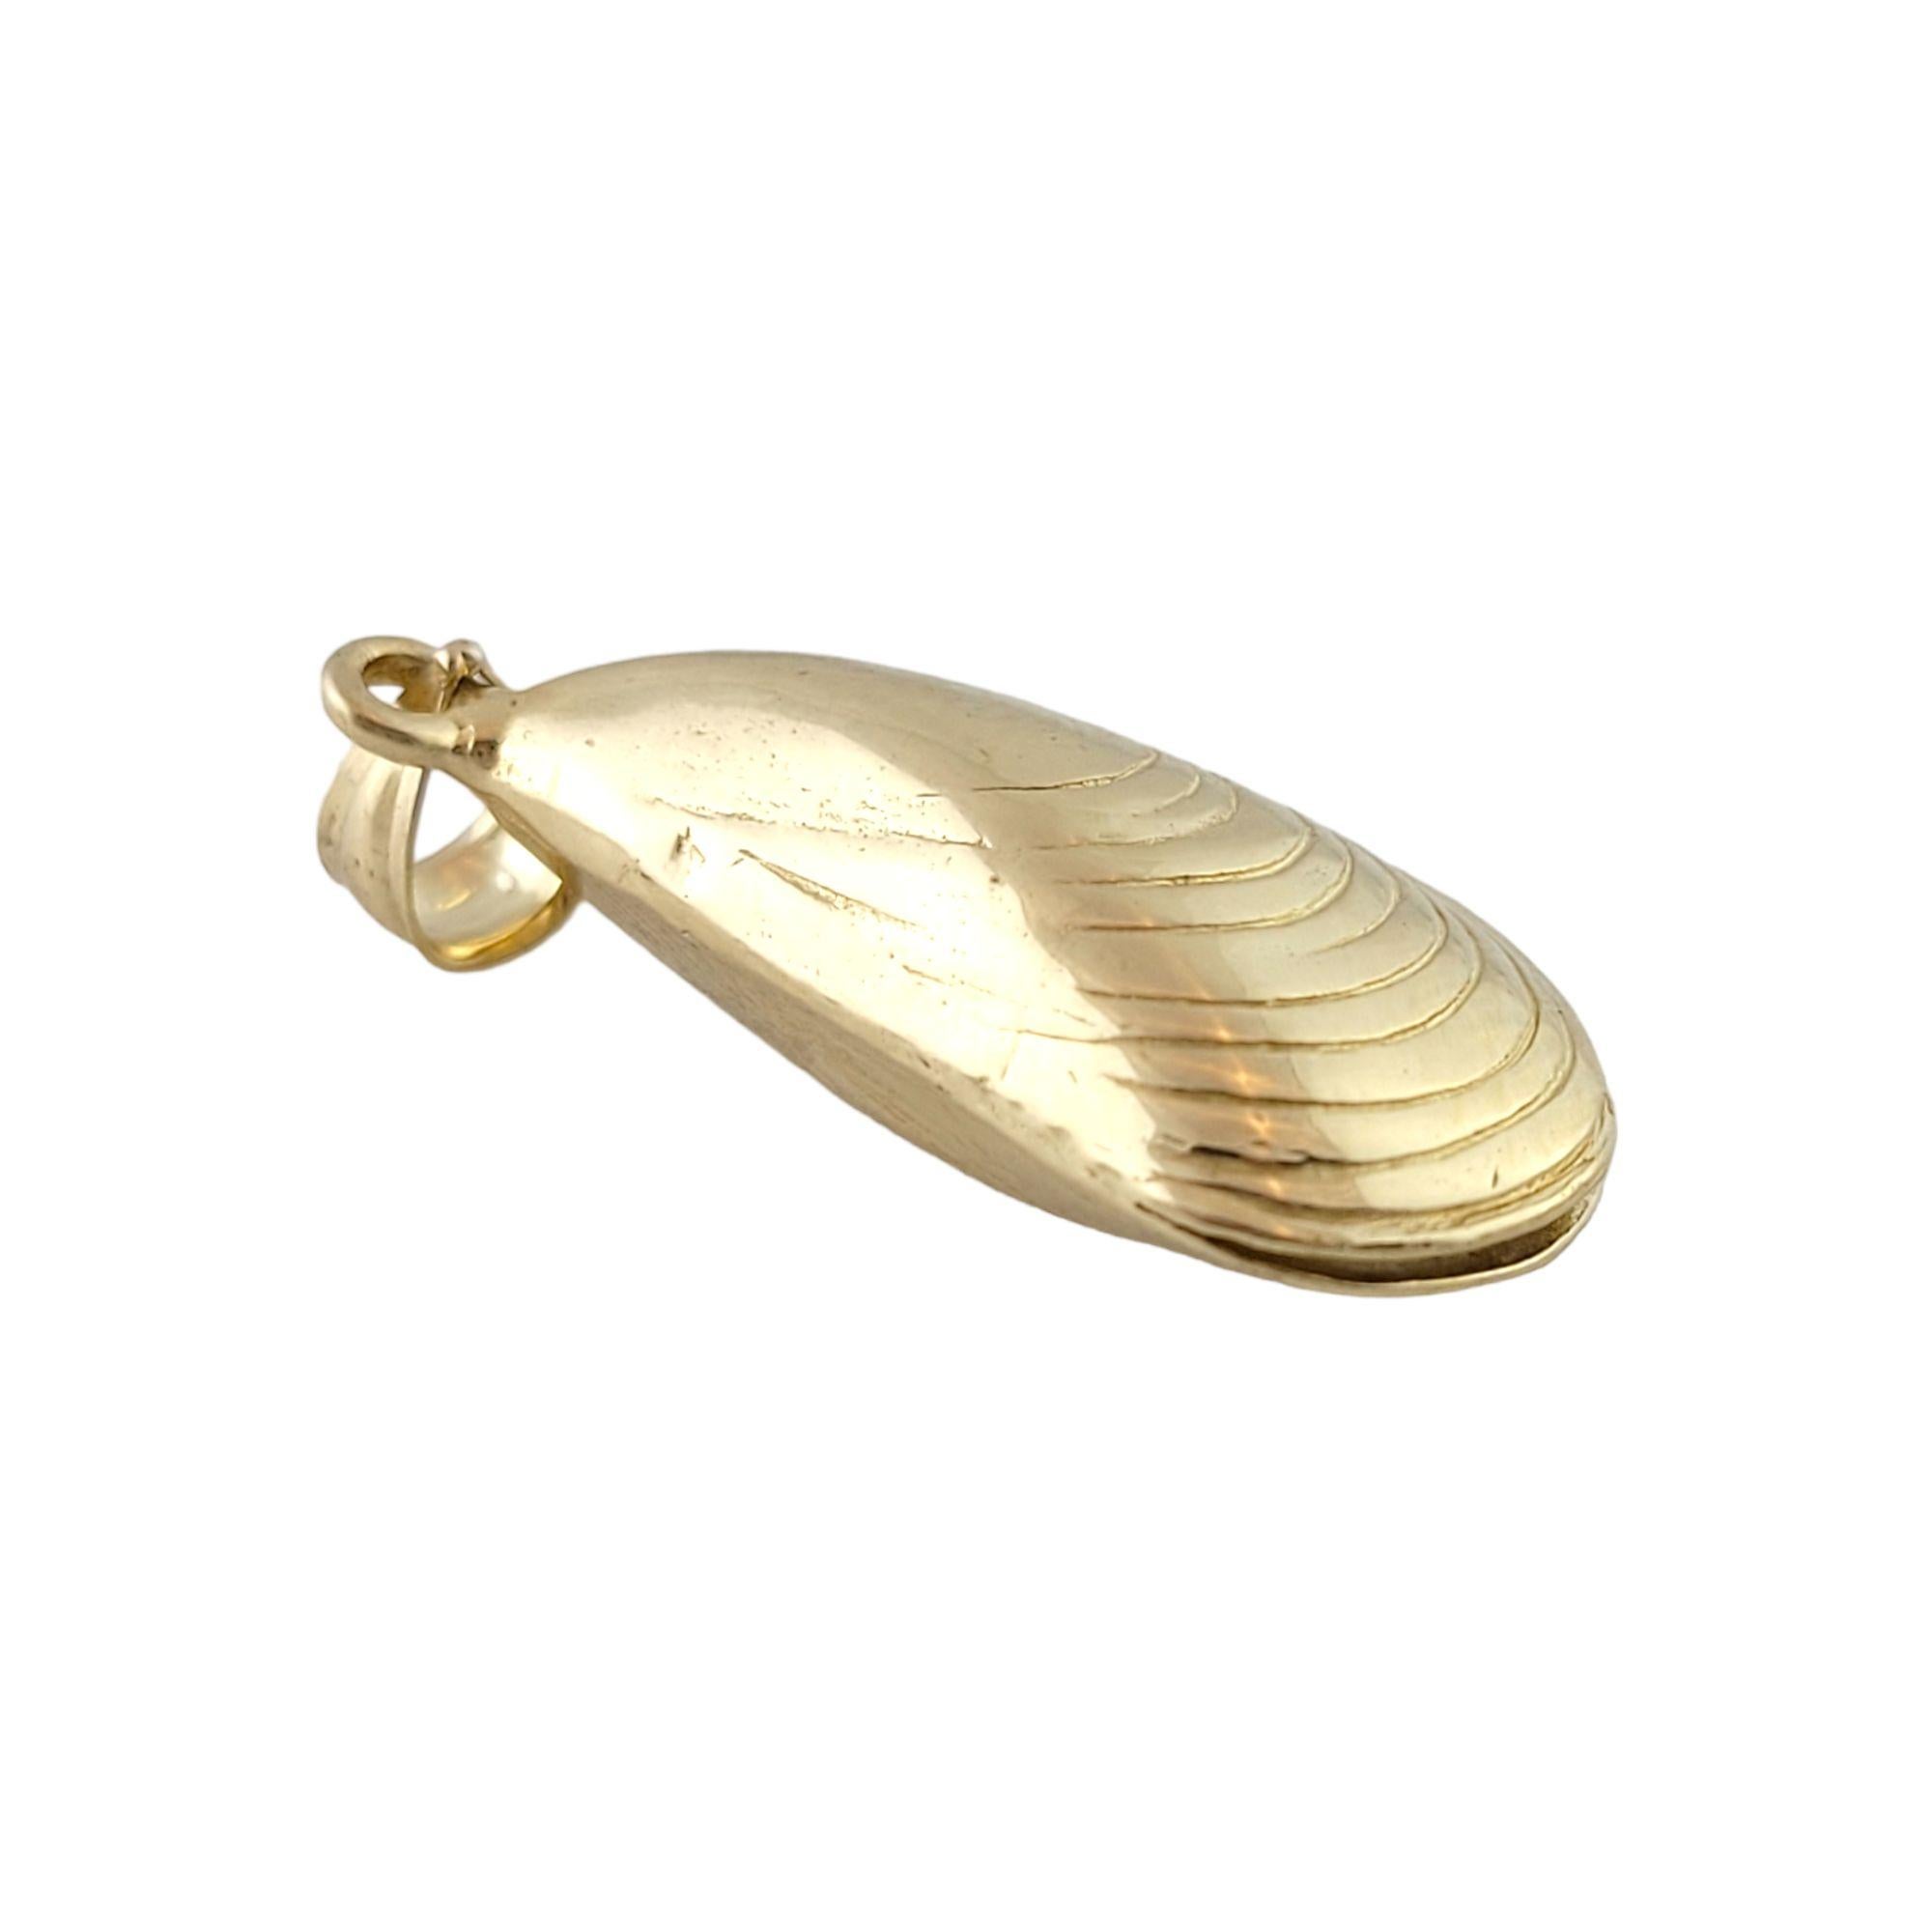 Vintage 14K Yellow Gold Mussel Shell Charm

This adorable mussel charm made from 14K yellow gold is perfect for any sea lovers!

*does not open

Size: 27mm X 13mm X 8.5mm
Length w/ bail: 33mm

Weight: 5.7 g/ 3.6 dwt

Hallmark: 14K go

Very good